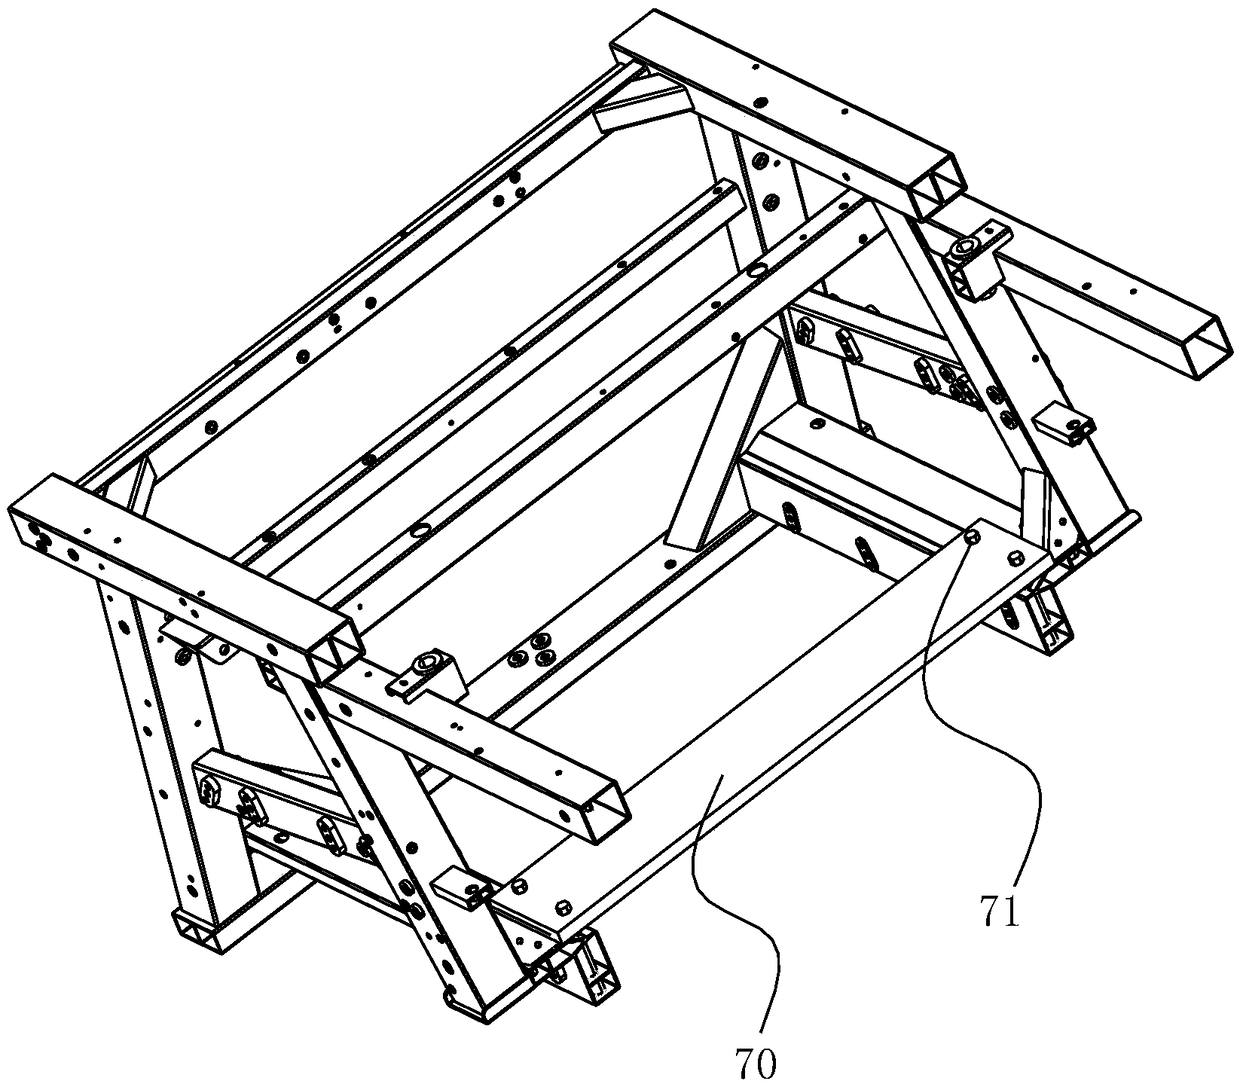 Frame-type car body rear compartment structure and welding method